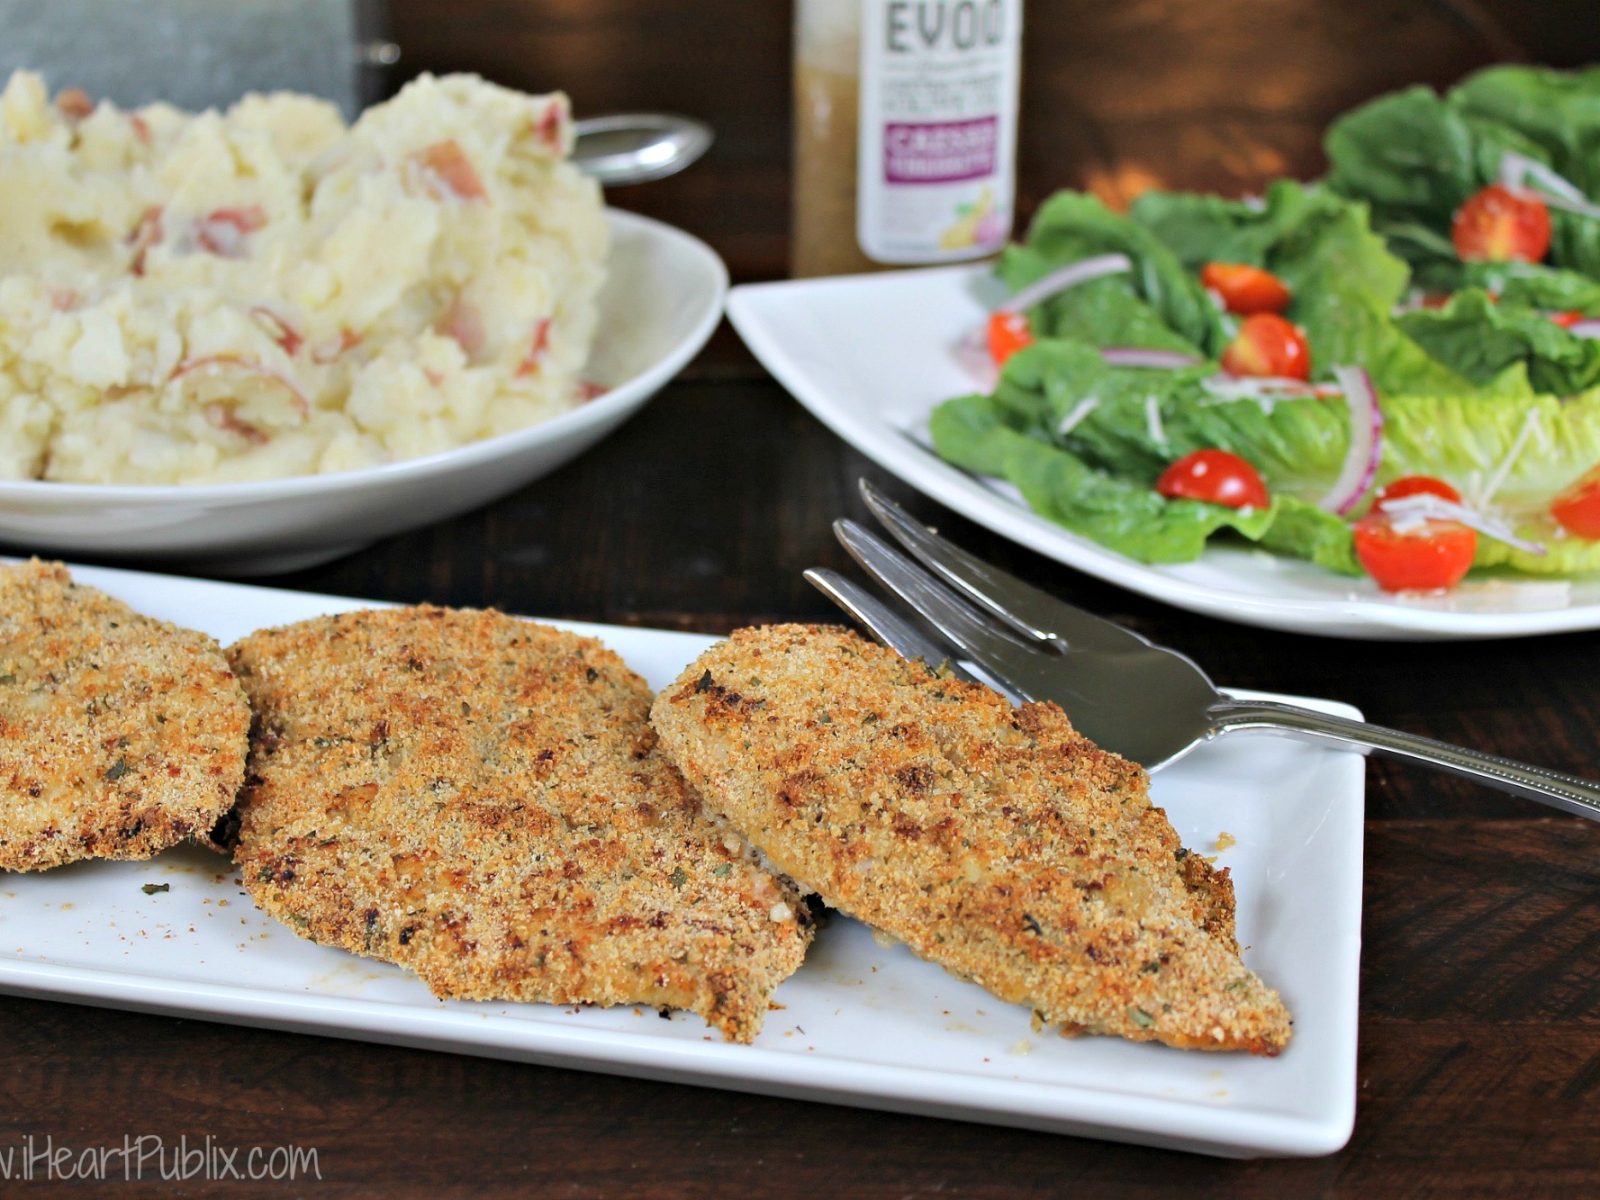 Crispy Caesar Chicken Breasts, Garlic Smashed Potatoes & Romaine Salad – Delicious And Easy With The New Wish-Bone E.V.O.O. Dressings!